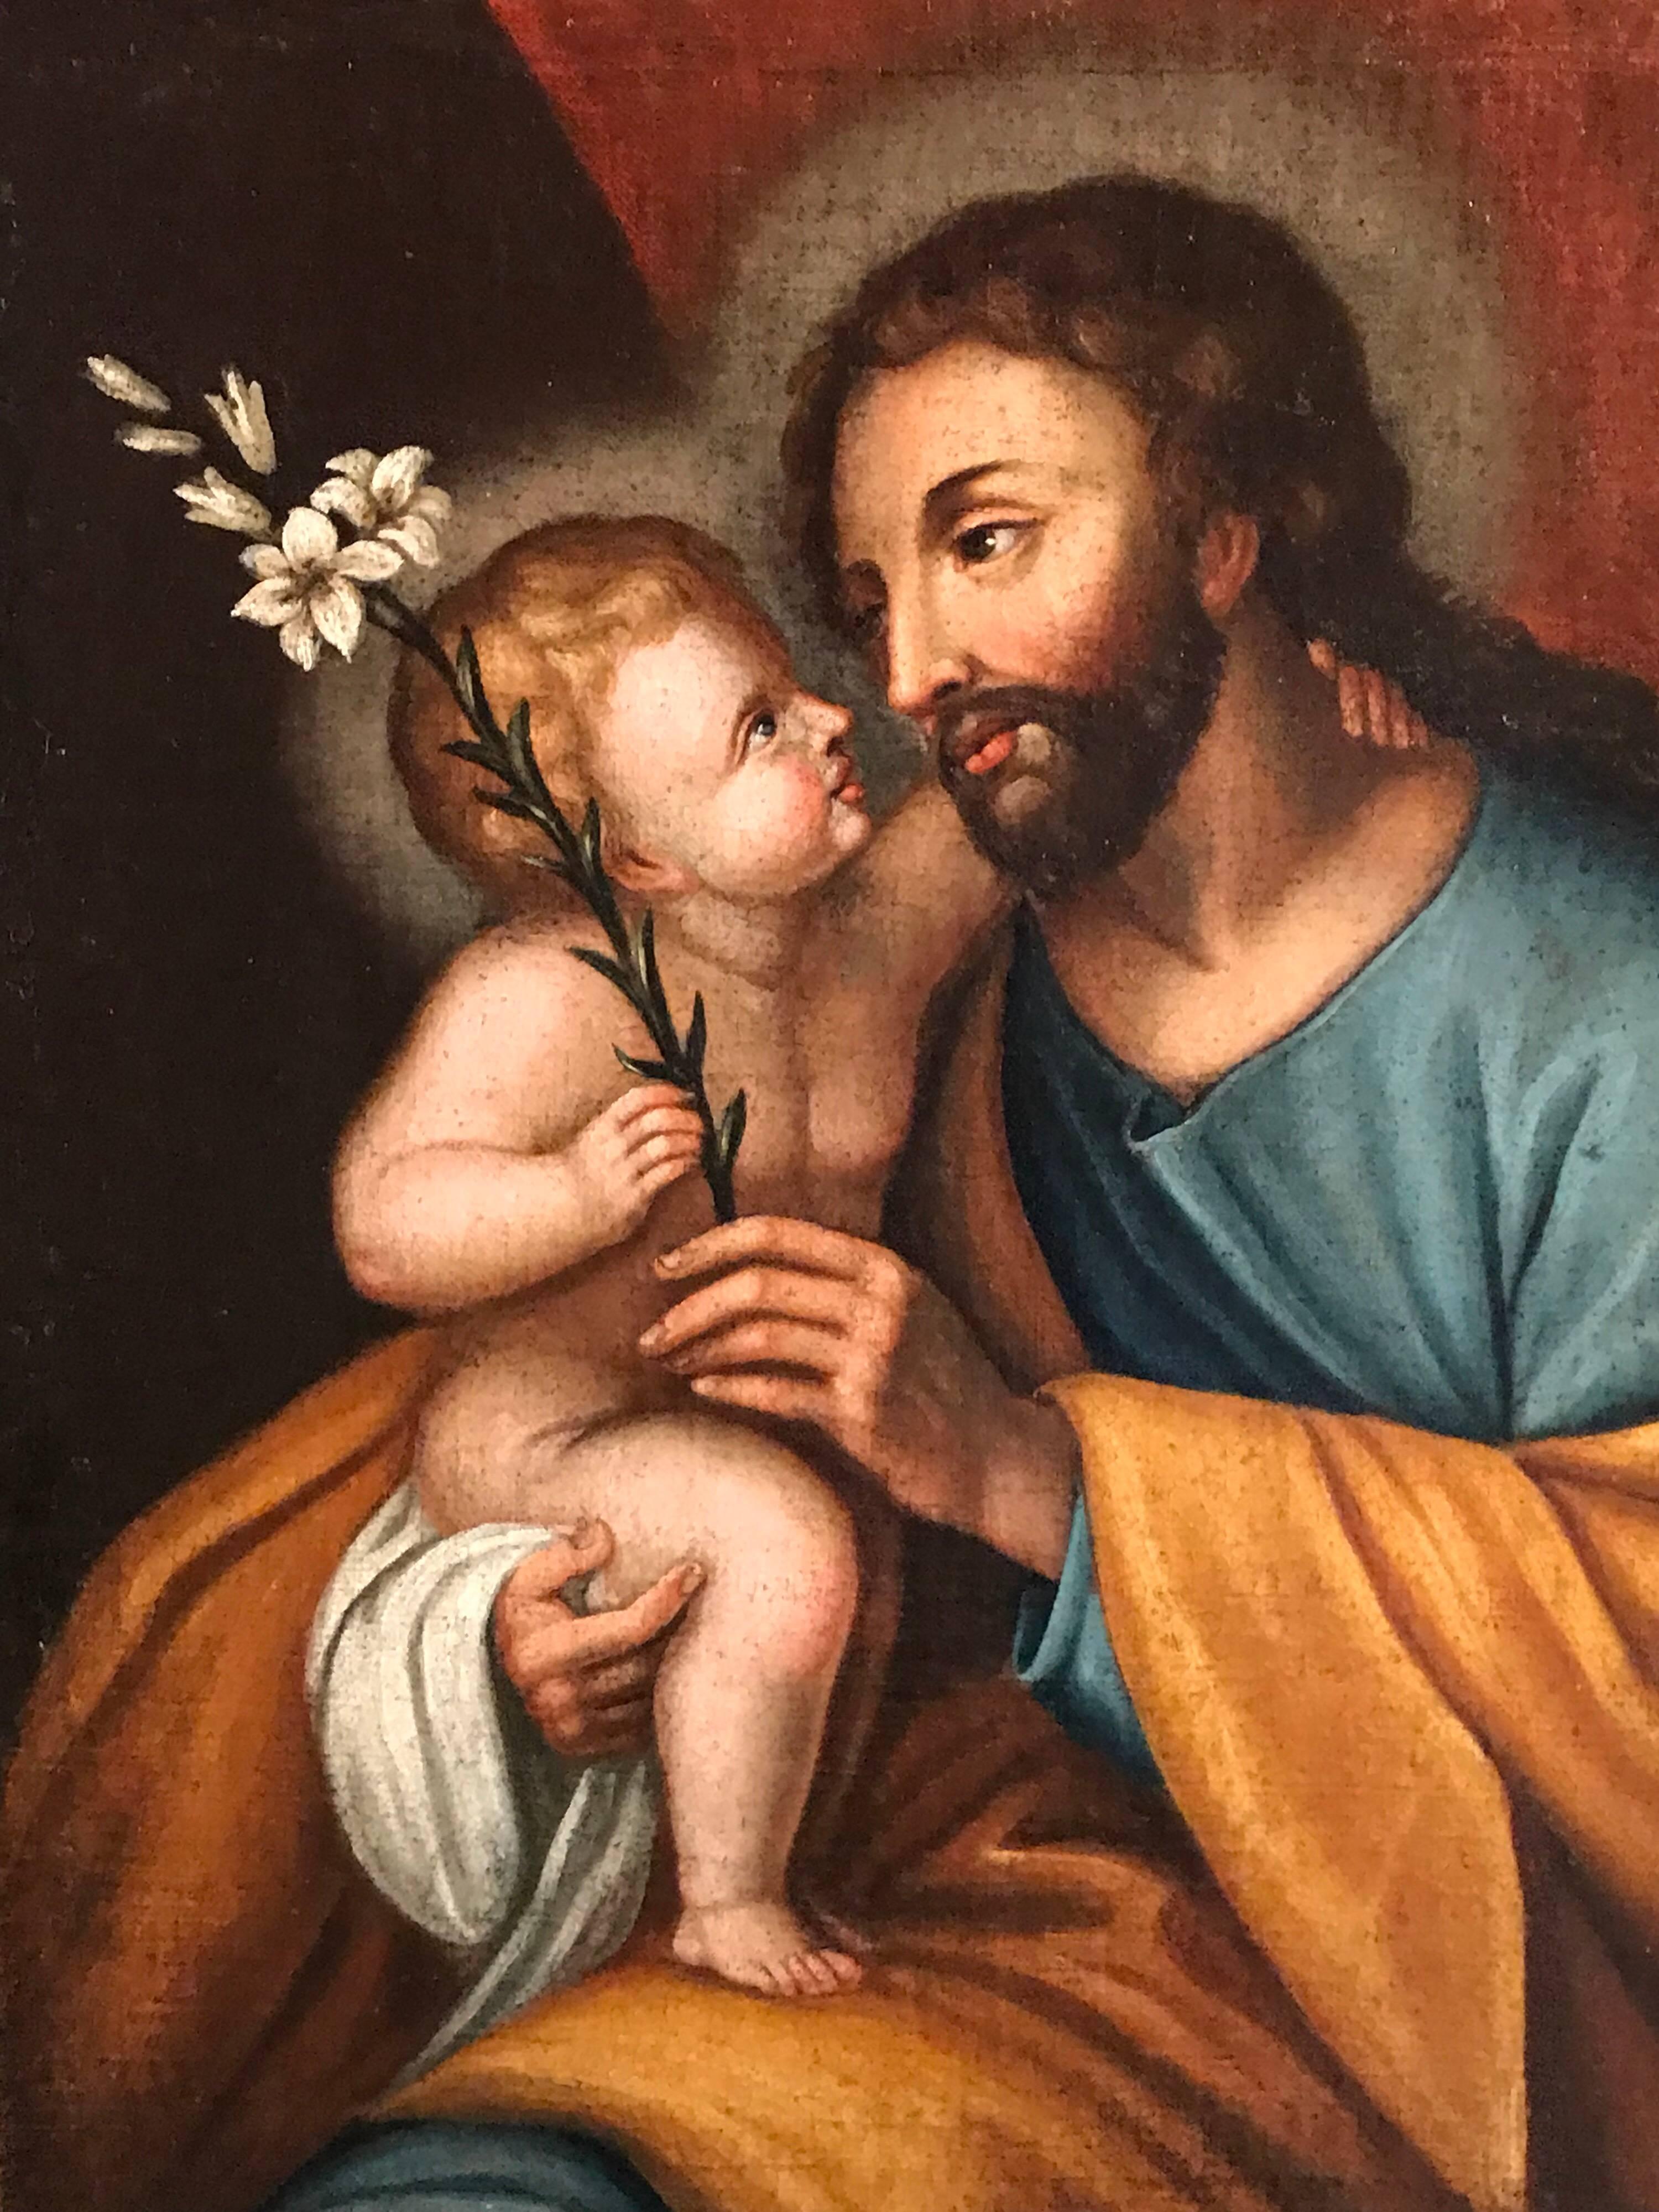 Joseph & Infant Christ Child, 17th century Old Master oil painting - Brown Portrait Painting by Unknown